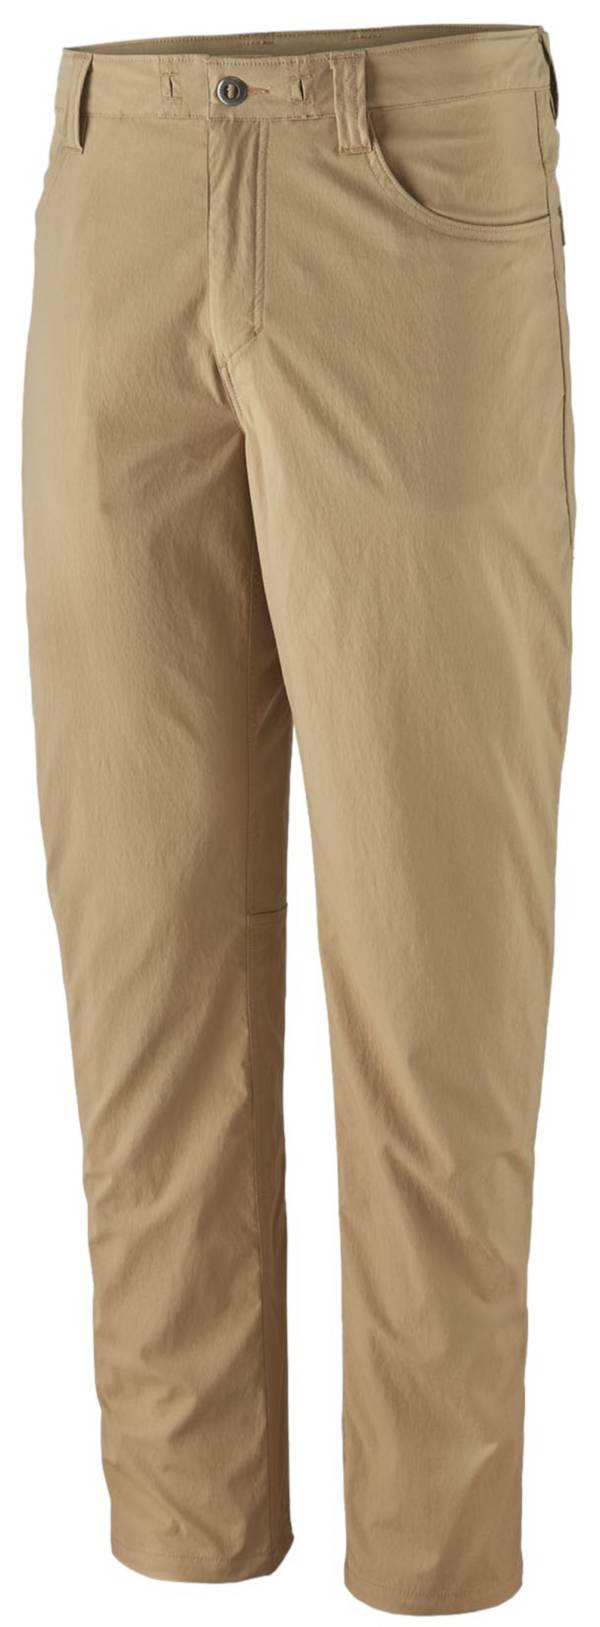 Wilderness Supply - Patagonia Men's Quandary Pant